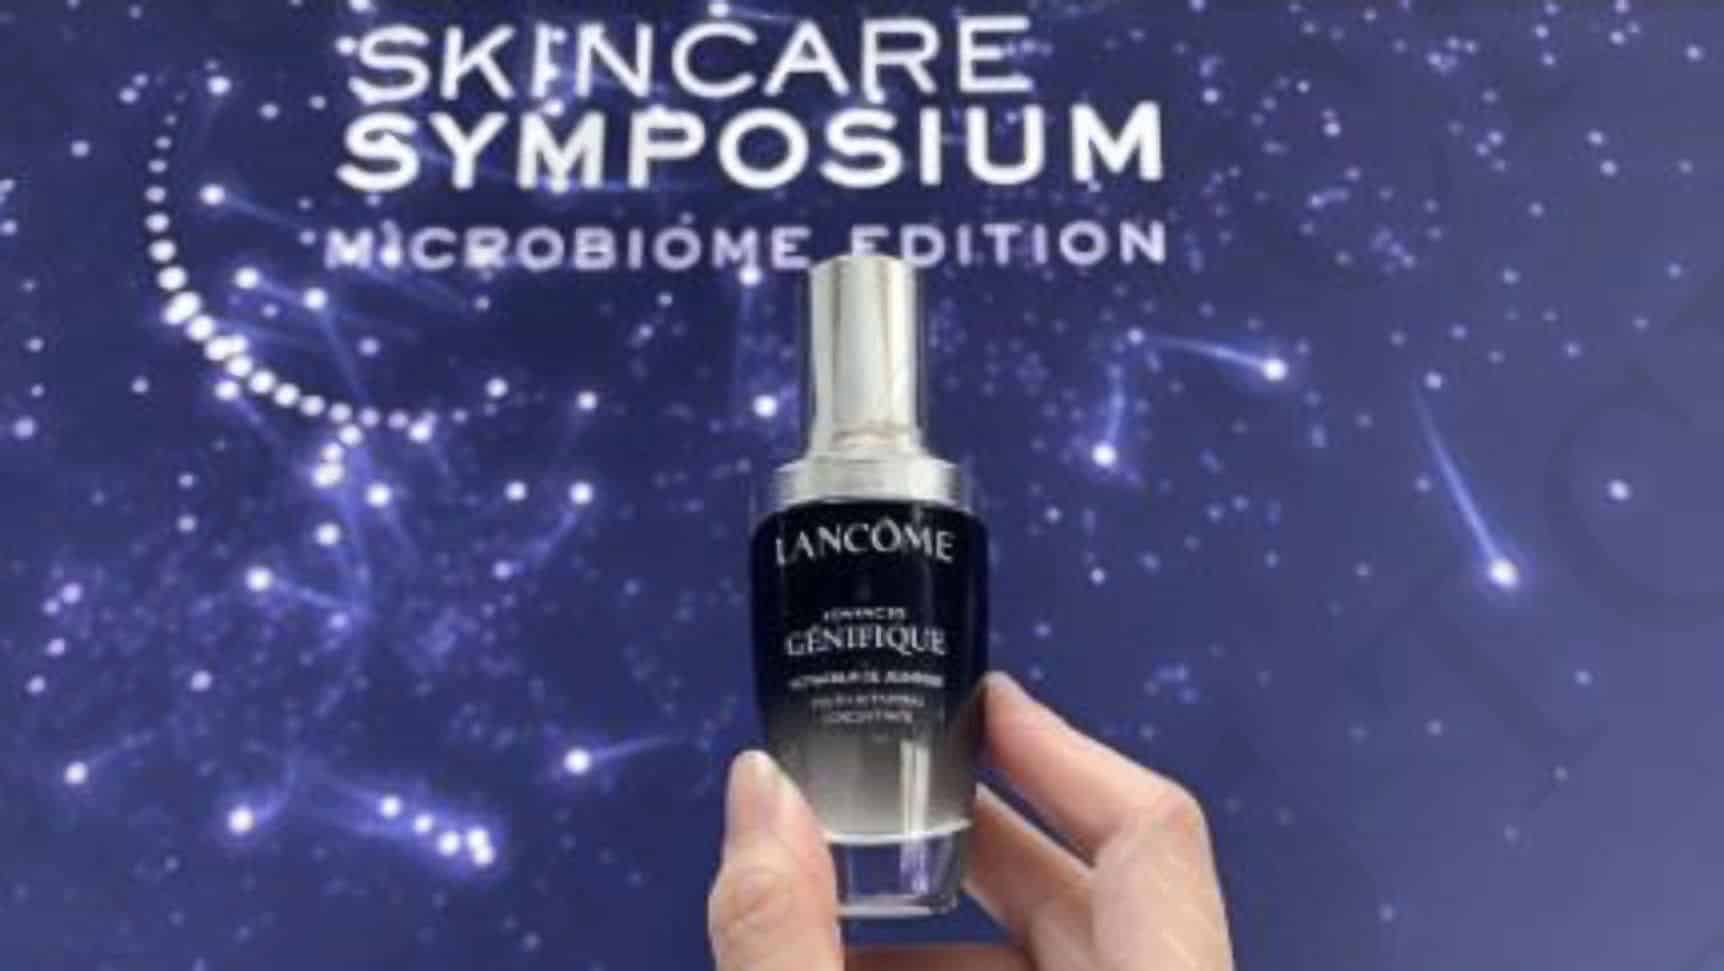 The ''microbiome edition'' of the Advanced Génifique Activating Serum produced by Lancôme for its 10th anniversary, Data source: VOGUE